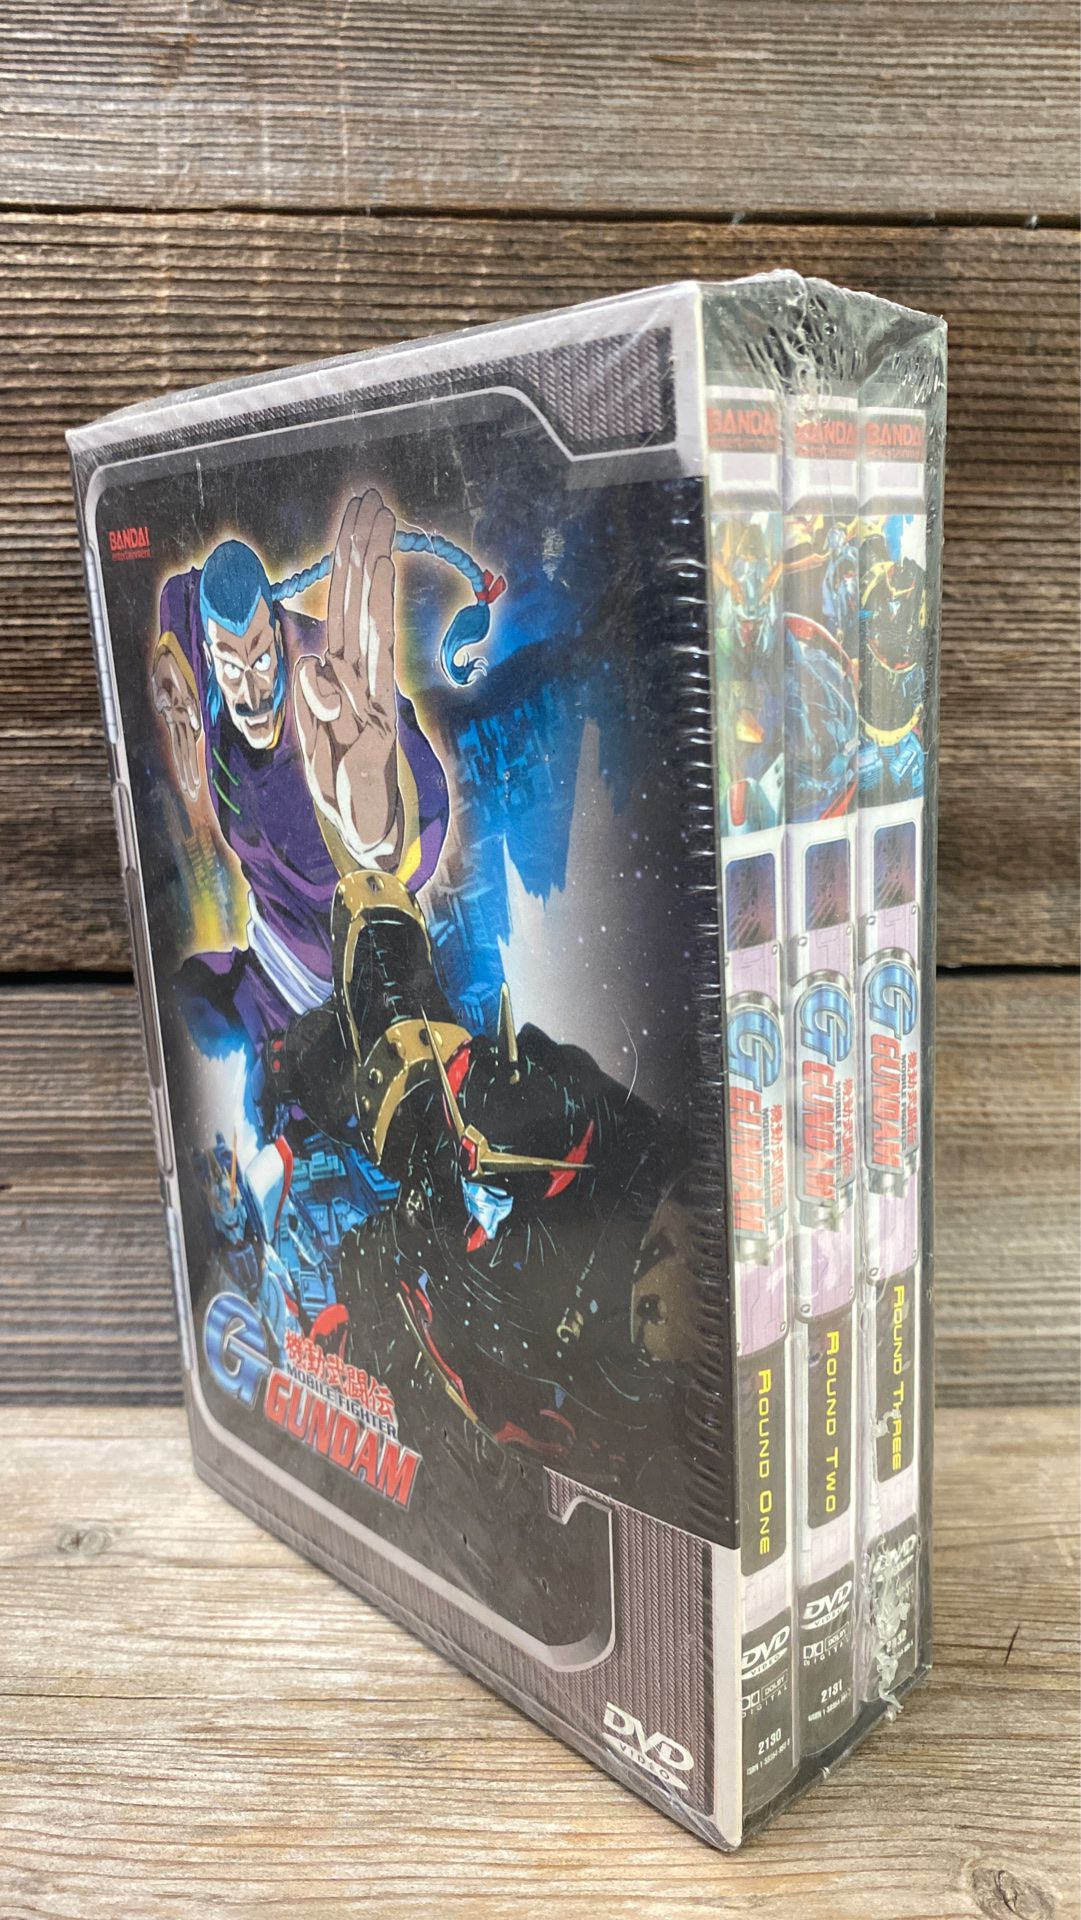 Mobile Fighter G GUNDAM Collectors Box Round 1-3 (3 dvds) NEW IN BOX!